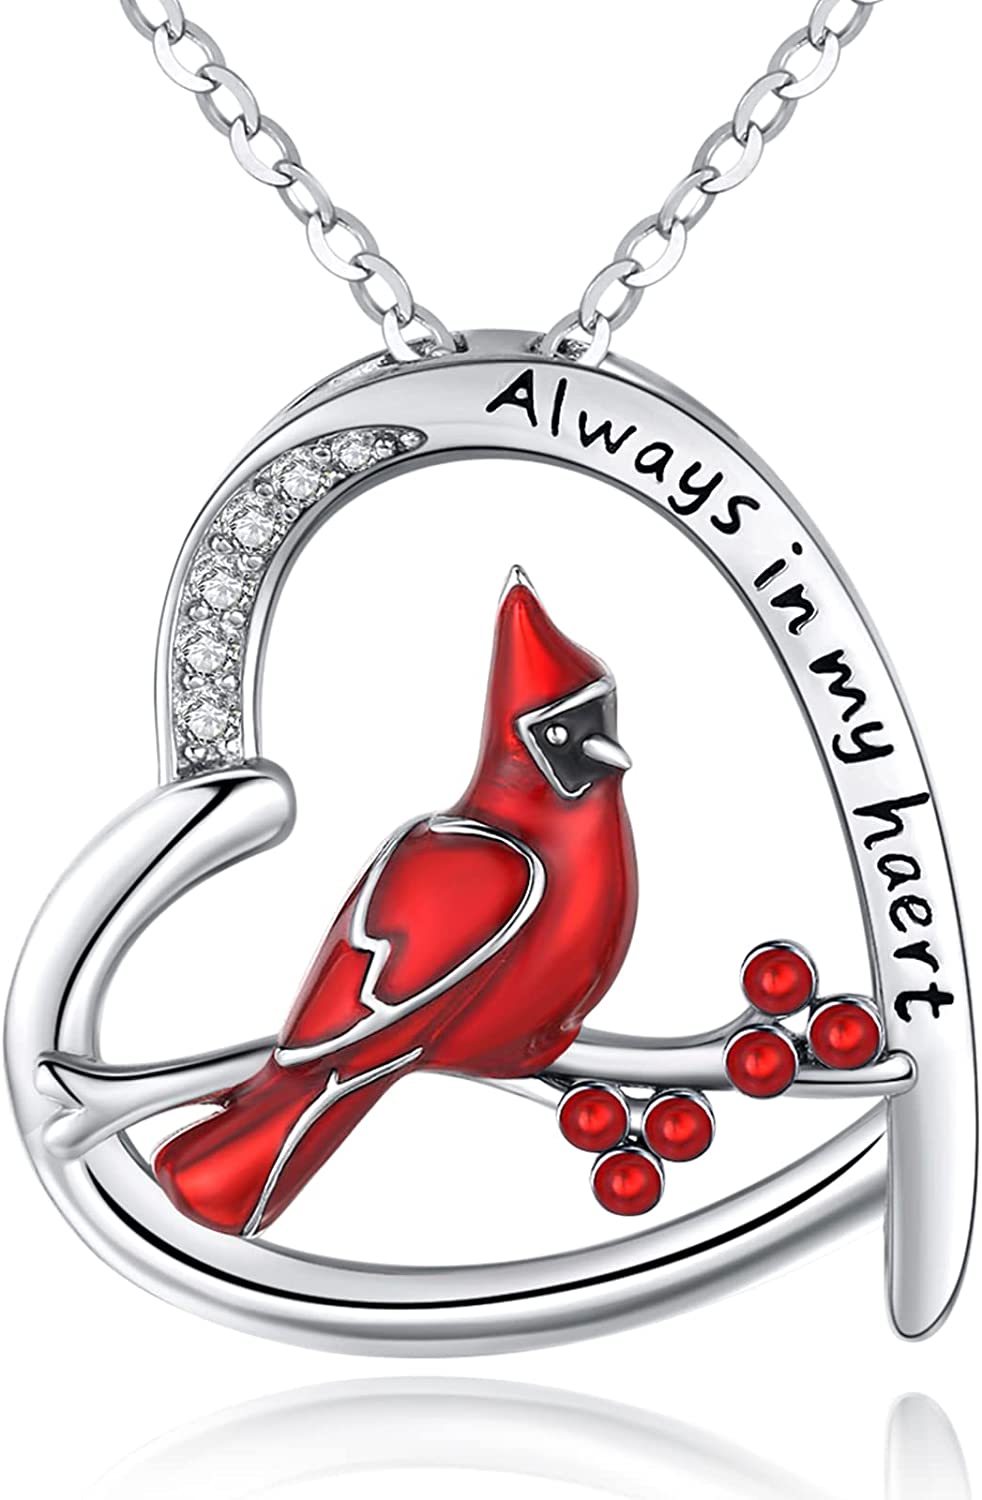 Cardinal Gifts 925 Sterling Silver Heart Cardinal Red Bird Necklace Memorial Gift Cardinal Jewelry for Women Girl